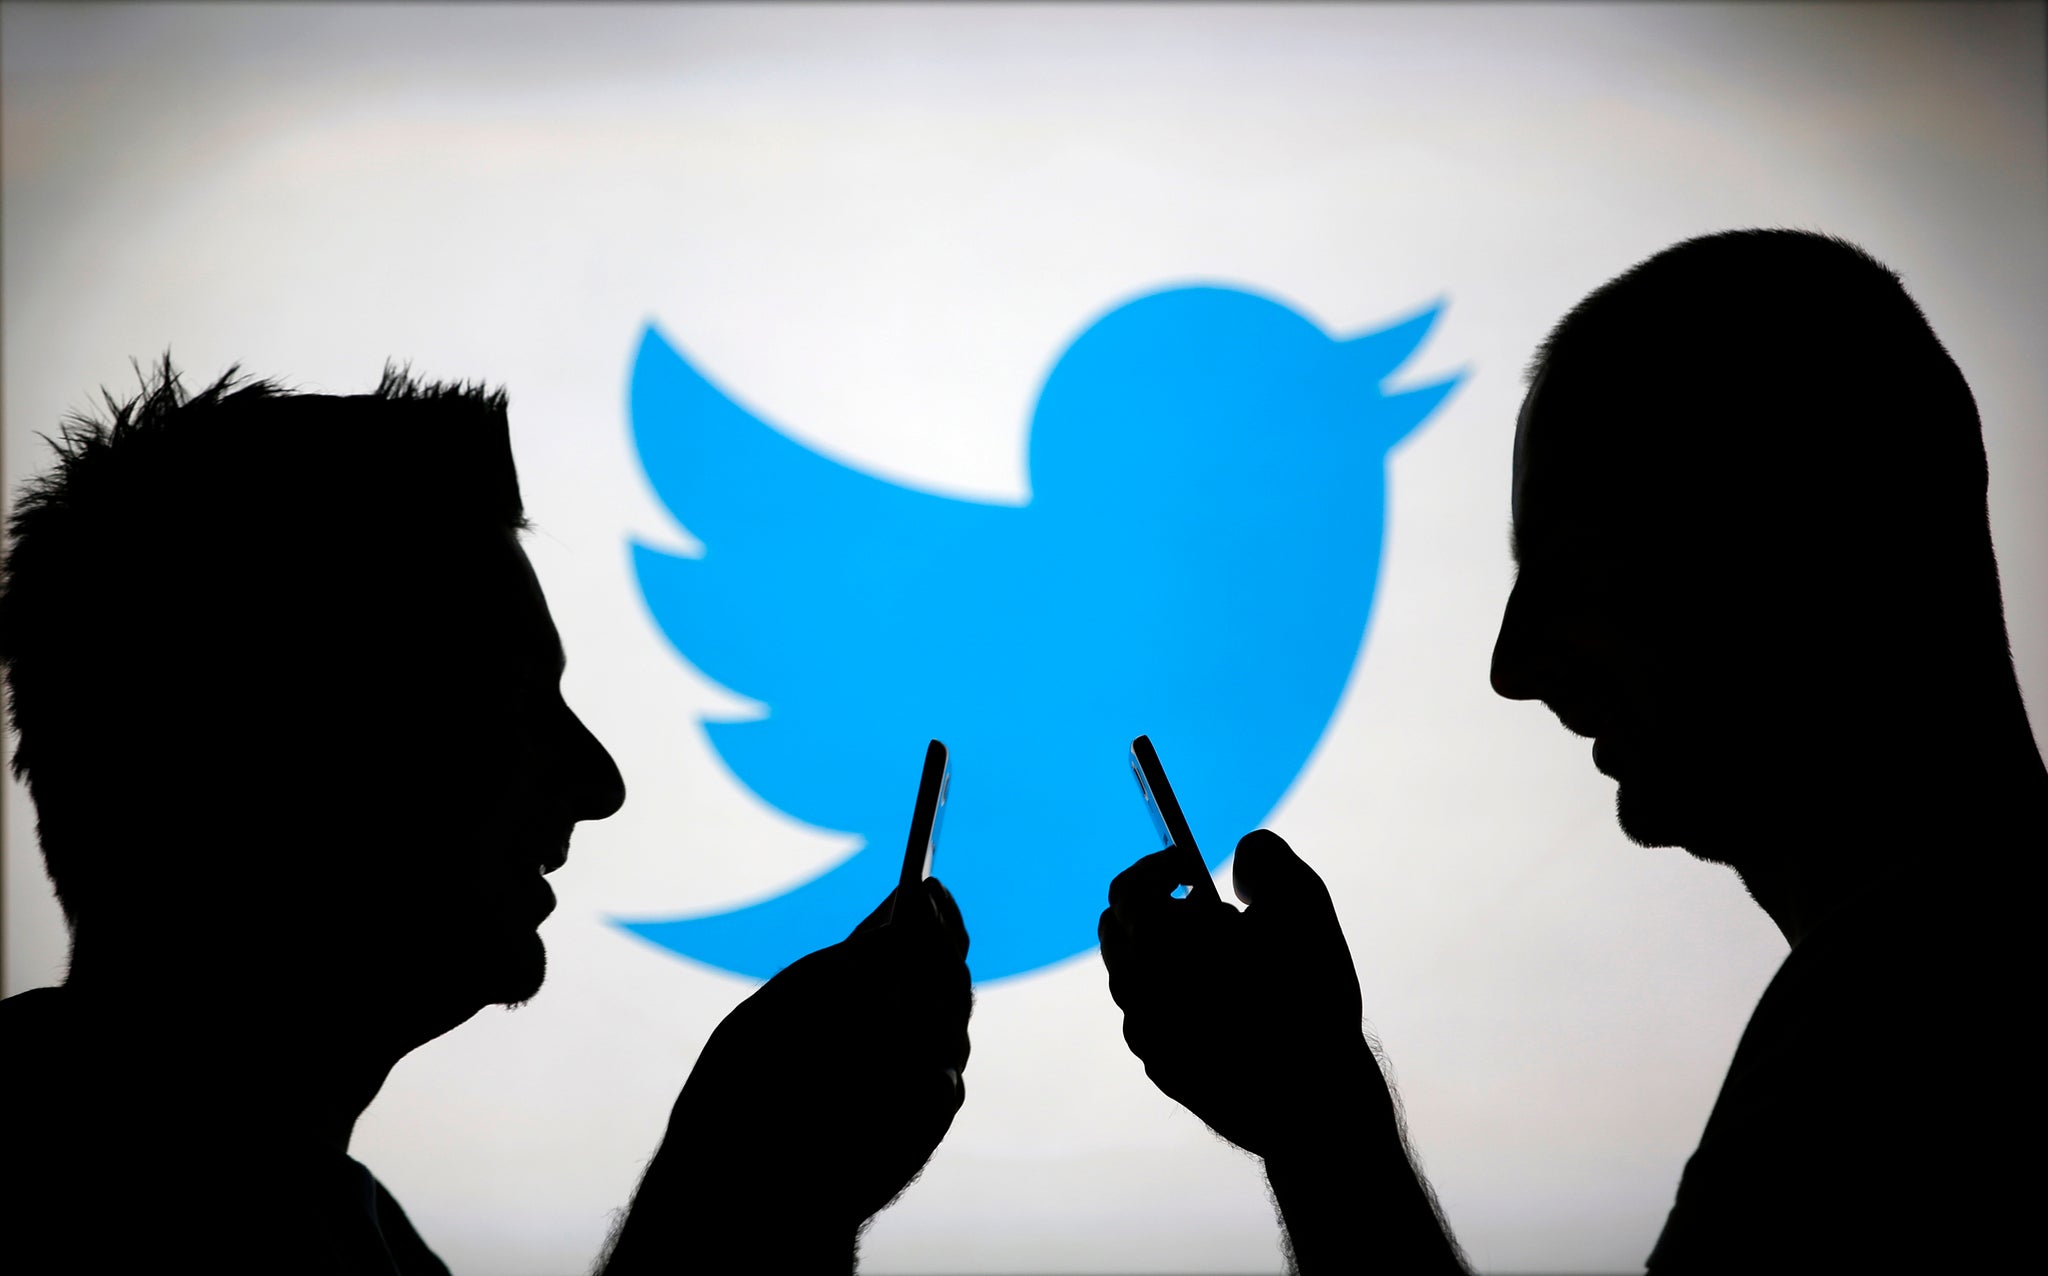 New research shows that 10,000 tweets contained racial slurs are sent every day